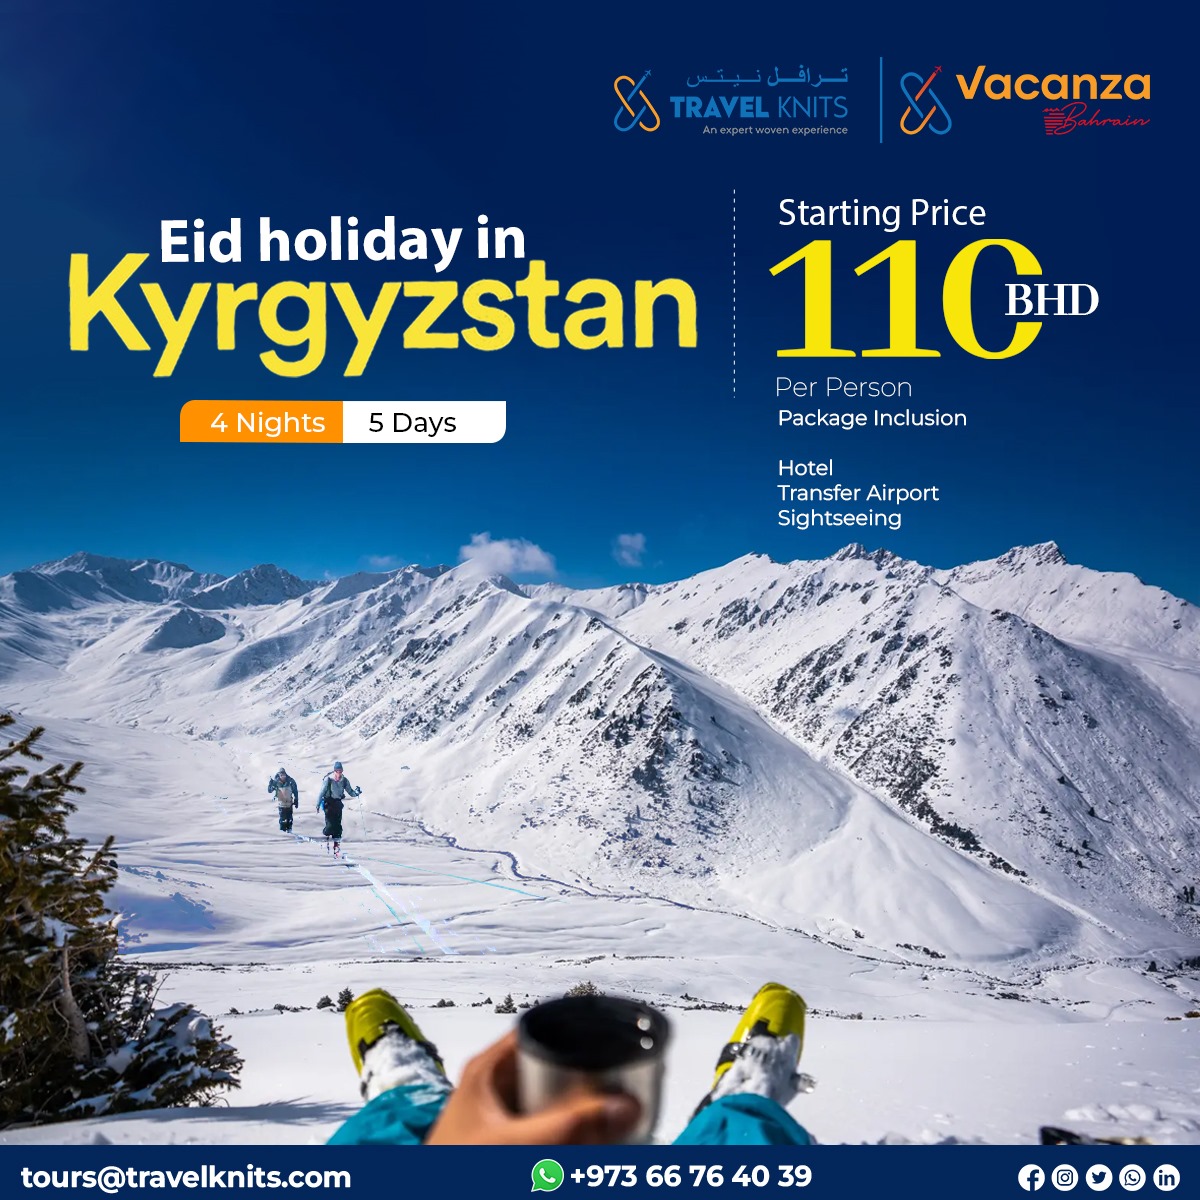 Eid holiday in Kyrgyzstan|KyrgyzstanTour Packages - Book honeymoon ,family,adventure tour packages to Kyrgyzstan|Travel Knits												